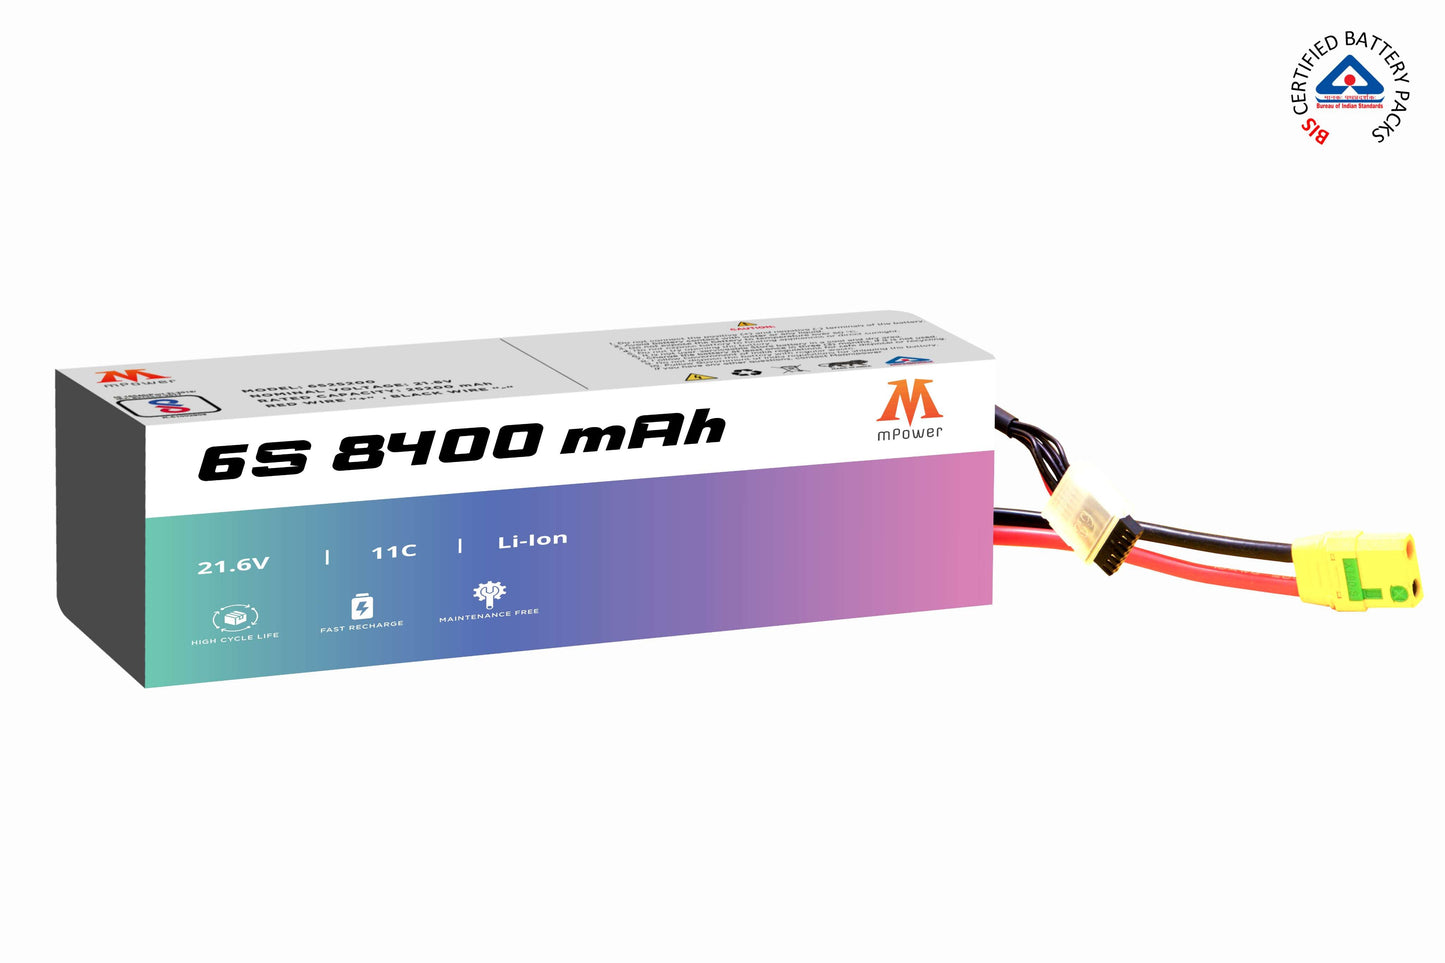 mPower 6S 8400mAh Lithium-Ion Battery for Surveillance Drones